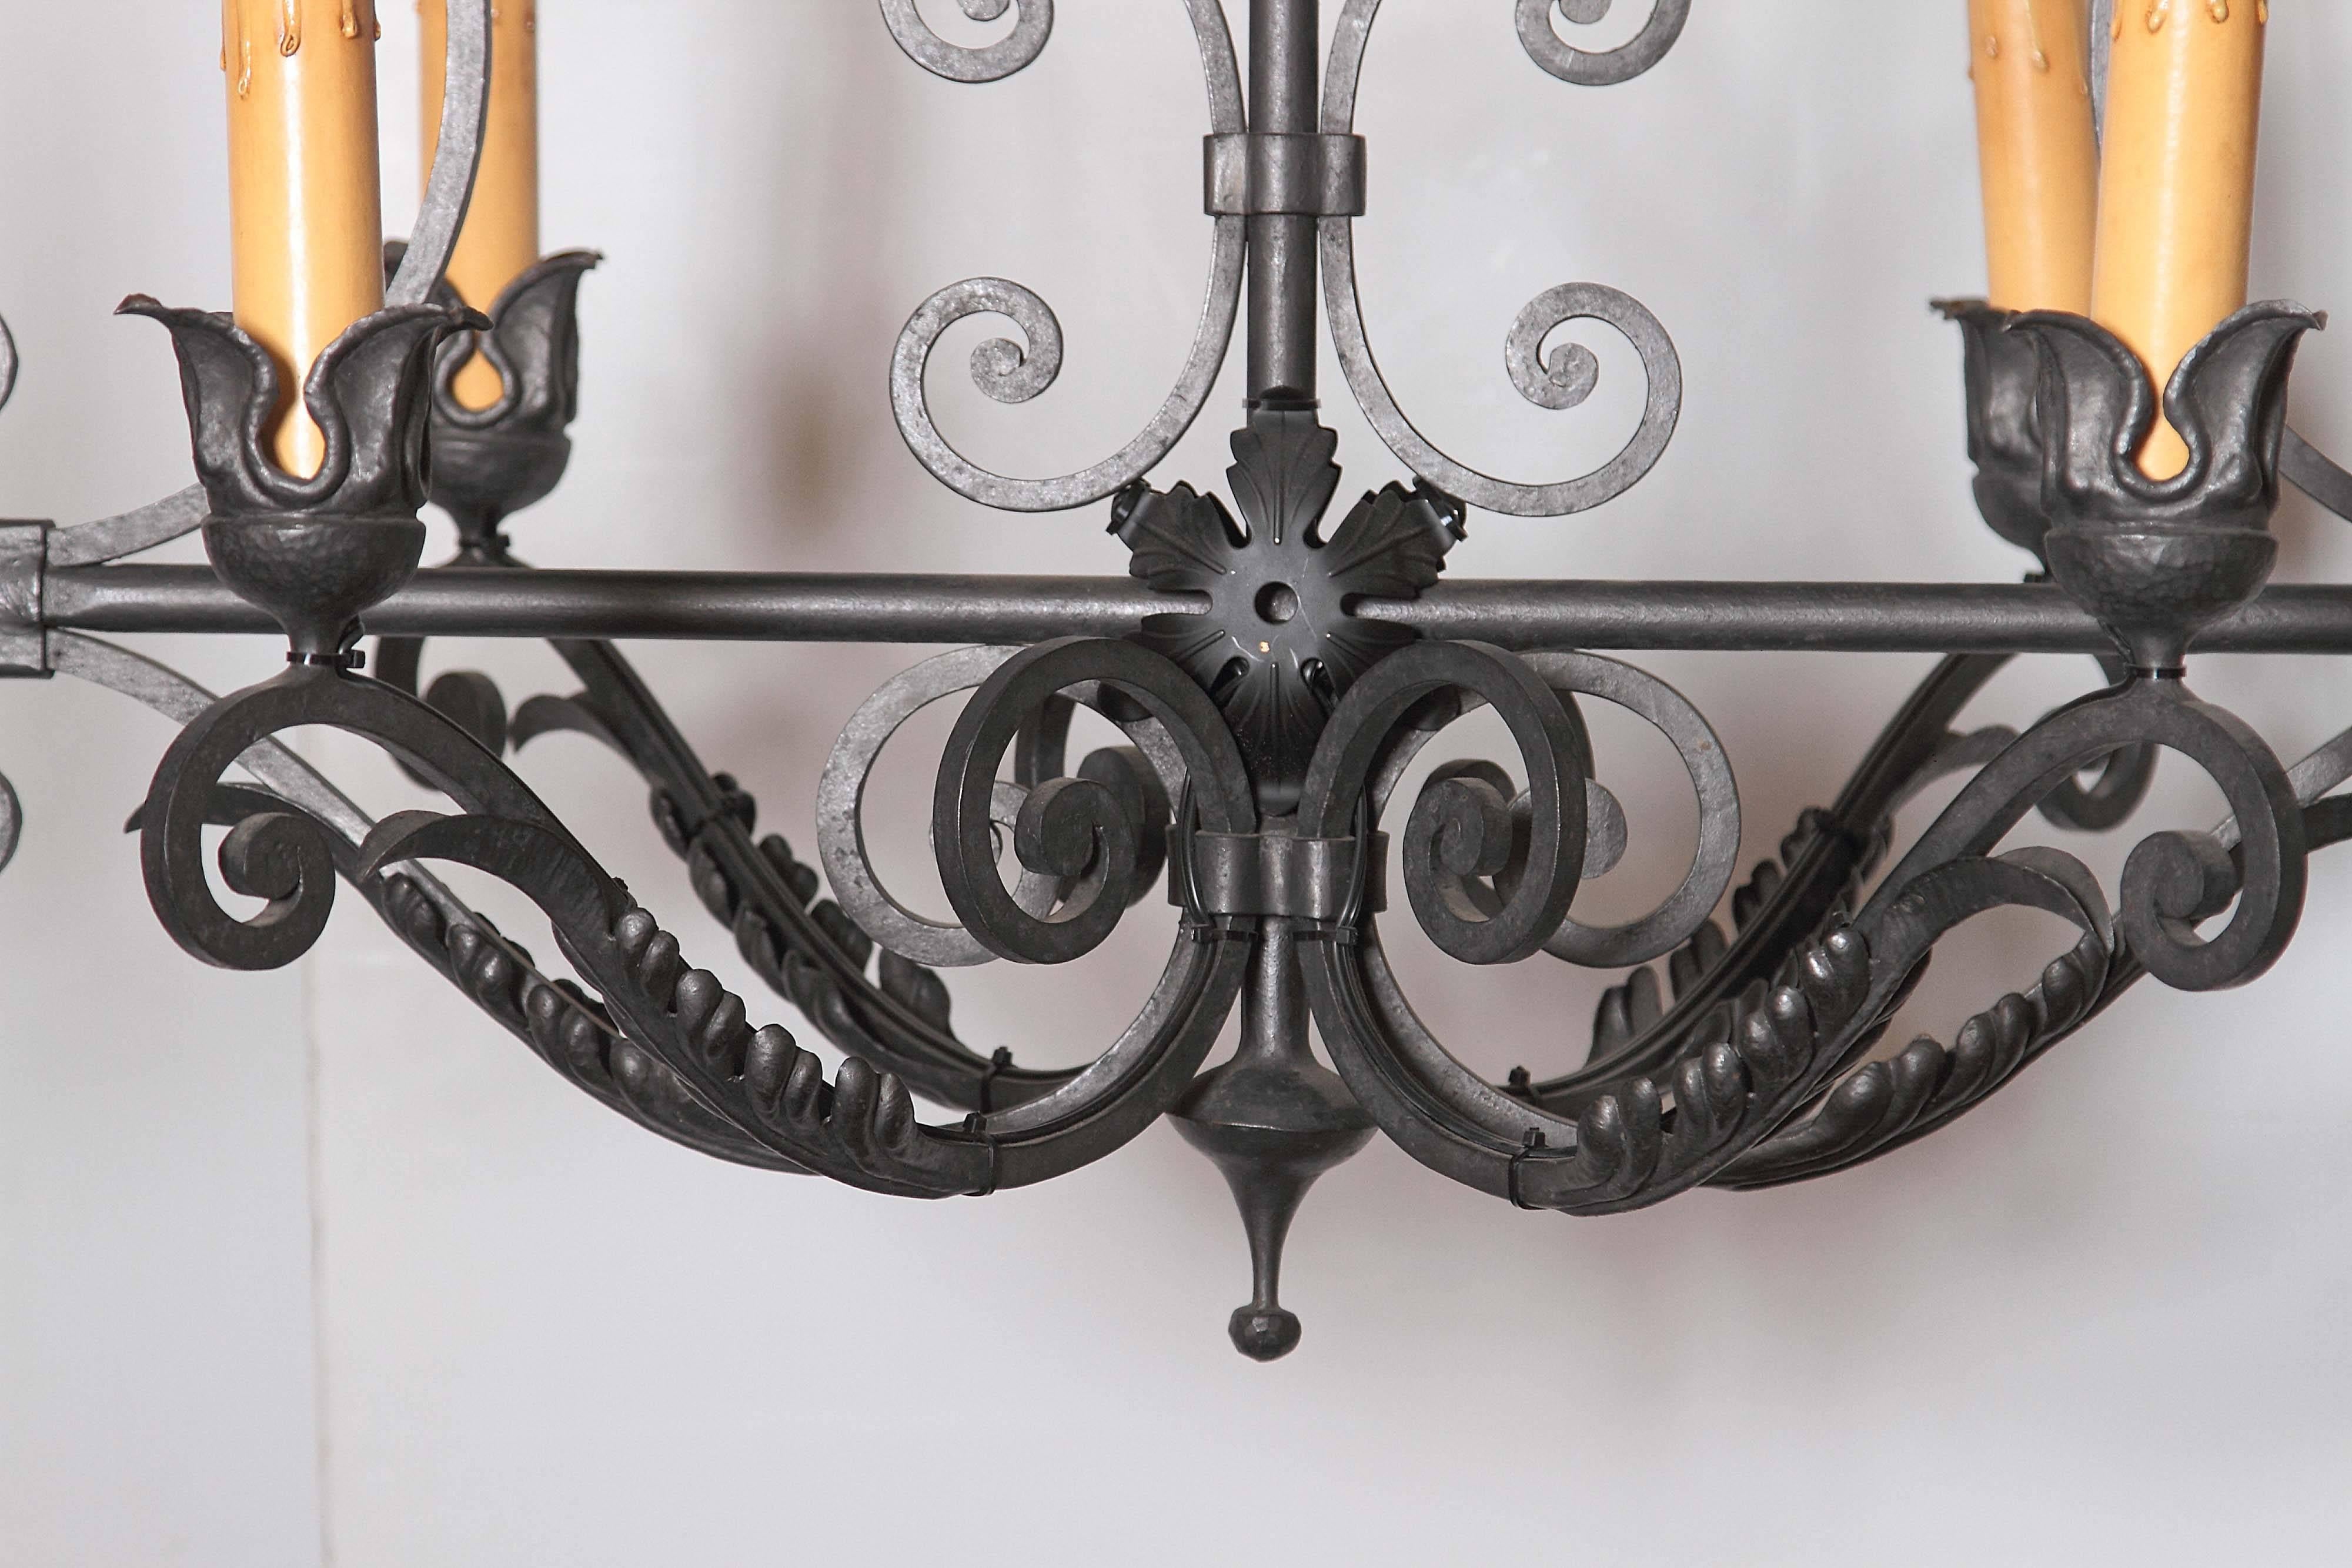 This elegant chandelier was crafted in France, circa 1950. The light fixture has six lights and a symmetrical, rectangular shape with scroll design. This neutral gray and black fixture has been rewired and would enhance the appearance and lighting